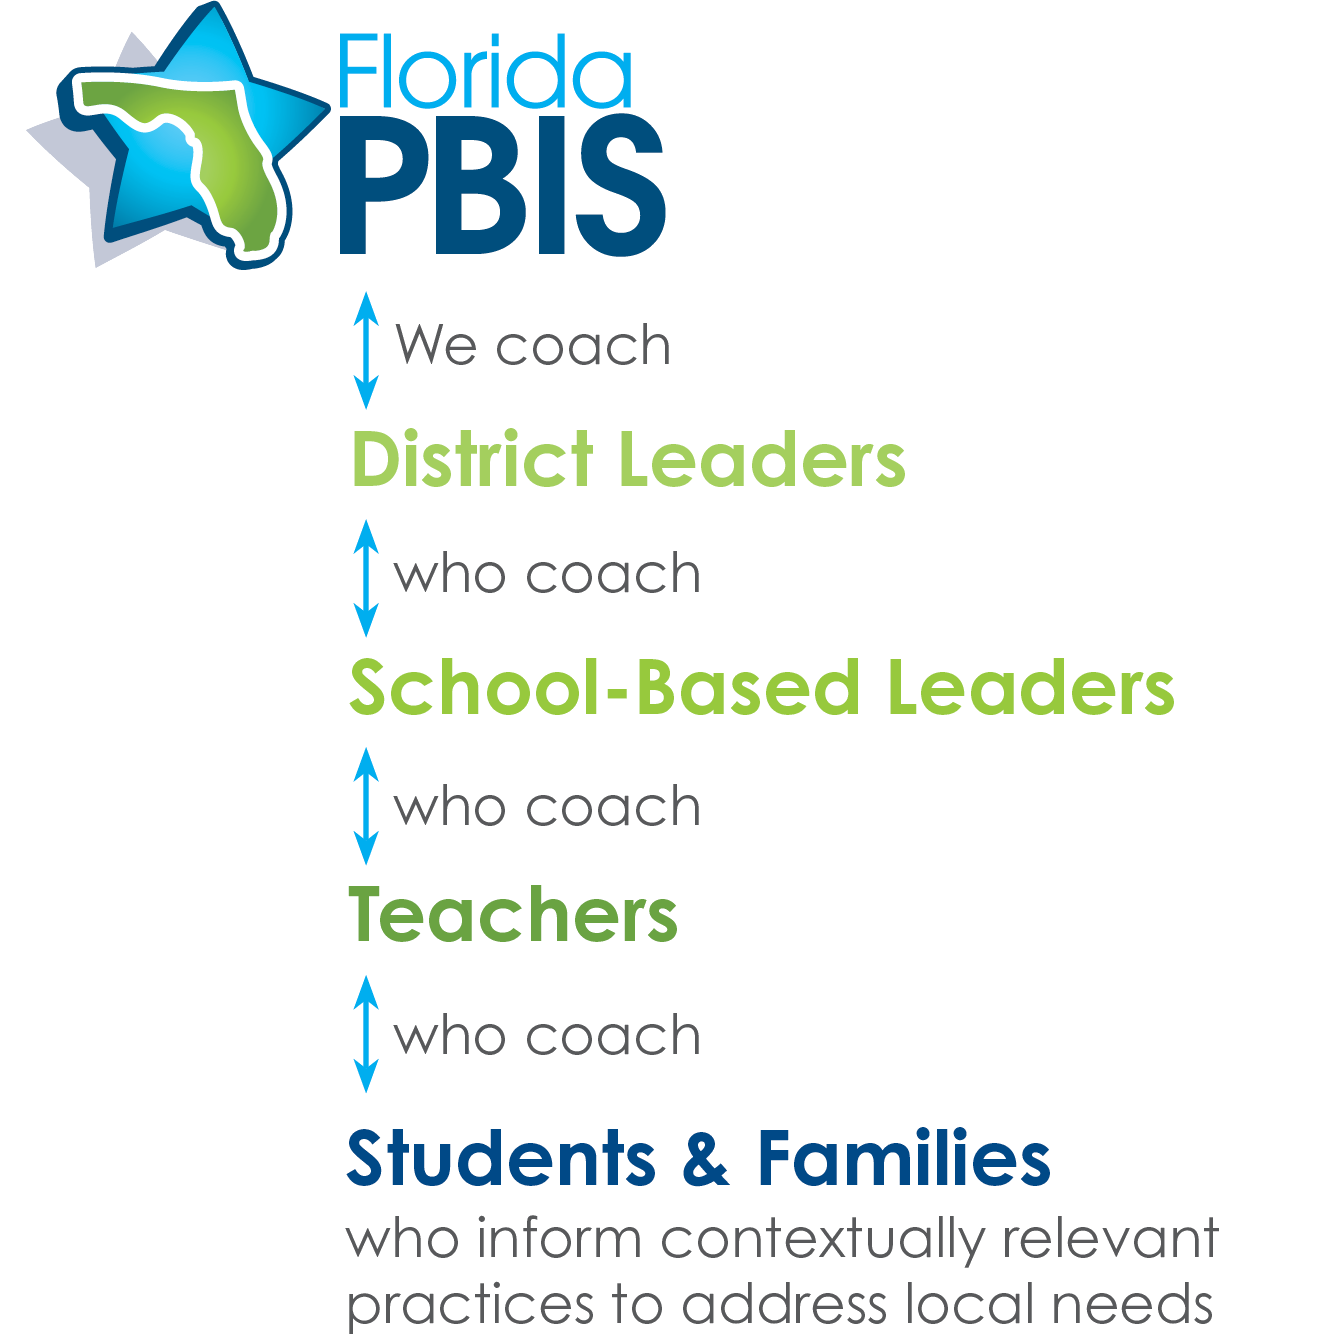 Diagram. We coach district leaders, who coach school-based leaders, who coach teachers, who coach students and families, who inform culturally responive practices to address local needs.